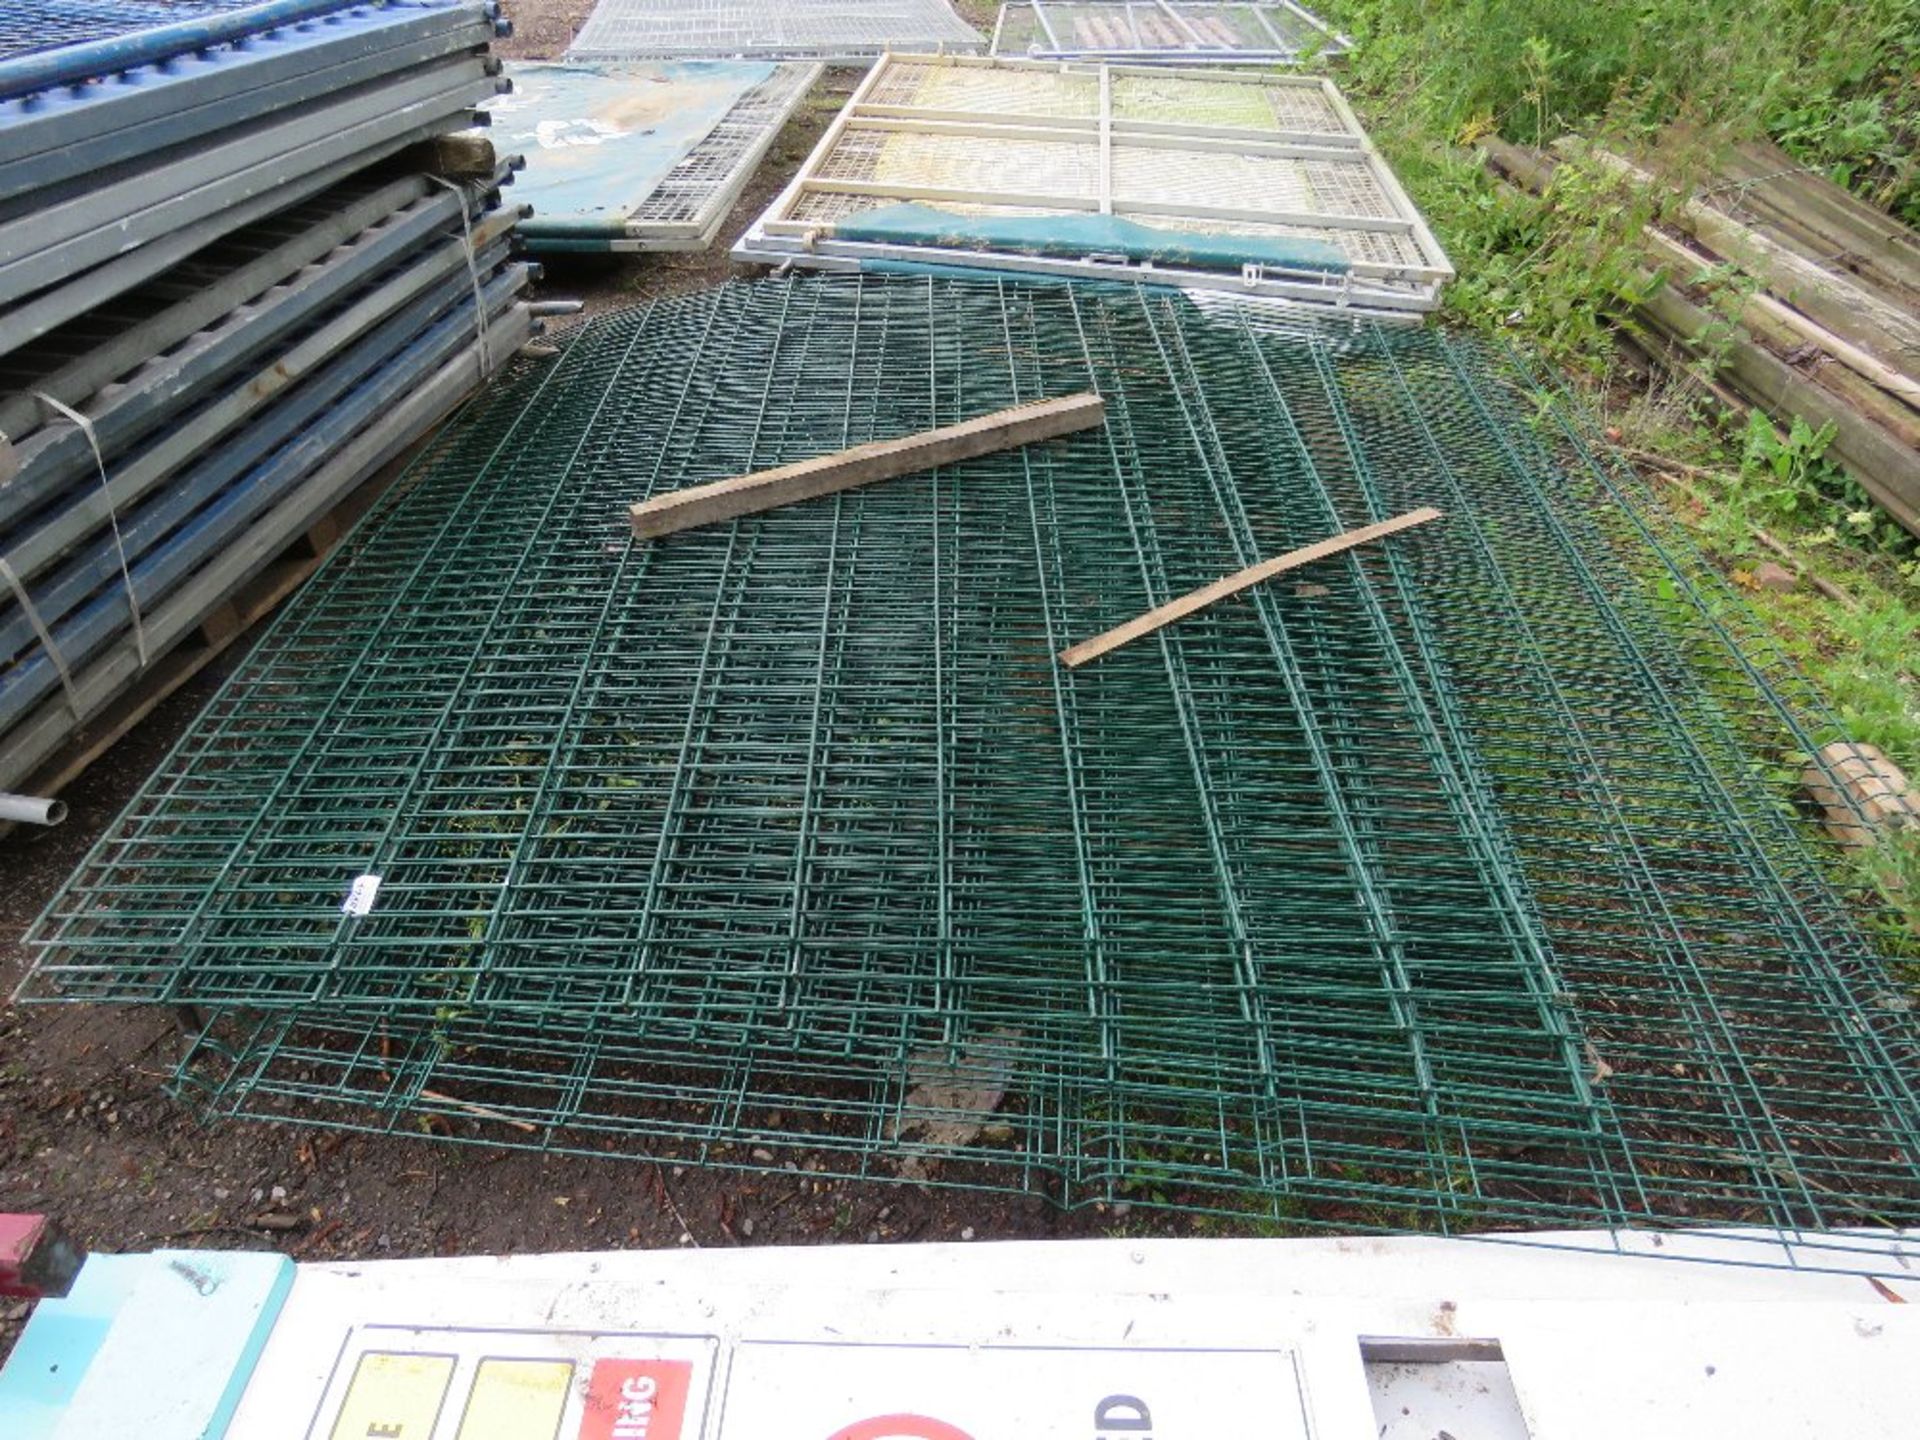 9 X ANTI CLIMB GREEN SECURITY MESH FENCE PANELS, MOST ARE DOUBLE THICKNESS SUPPORTS, LIKE PRISON SPE - Image 2 of 2